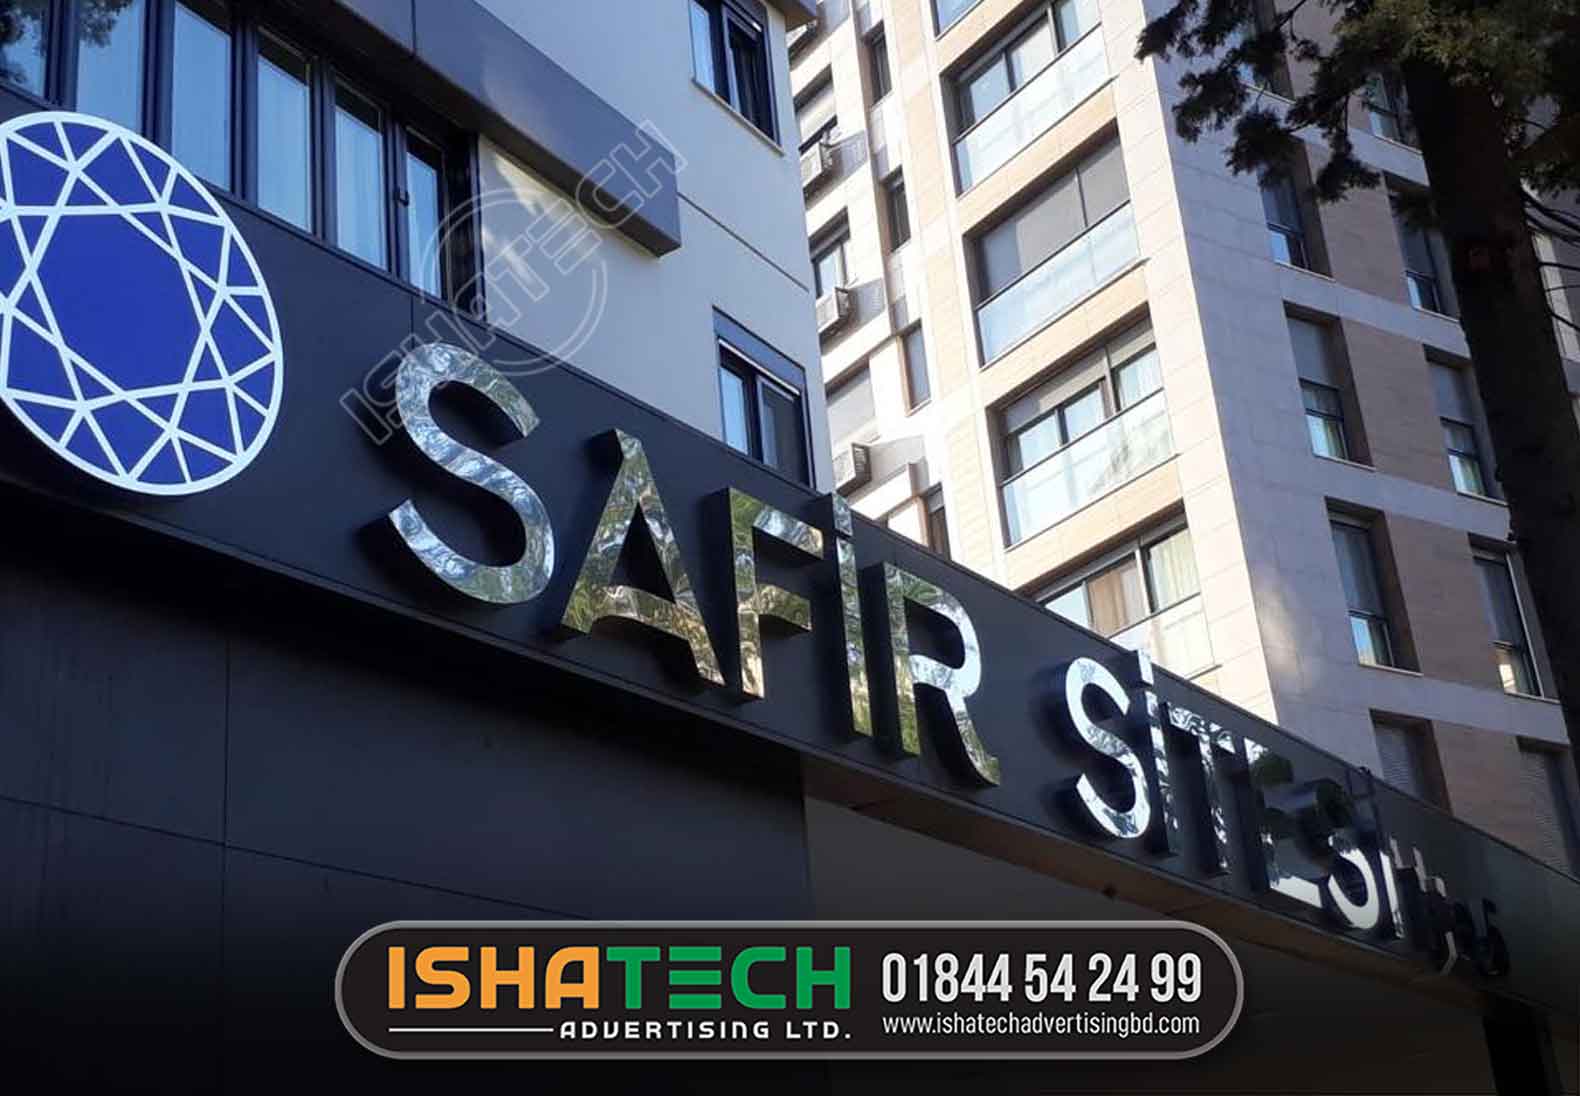 SS Sign Board SS Top Letter Acrylic Top Letter SS Metal Letter, SS Sign Board SS Top Letter Acrylic Top Letter SS Metal Lett in Advertising & Design, Services, price in Bangladesh Tk. 1050 from BDT 1,050.00